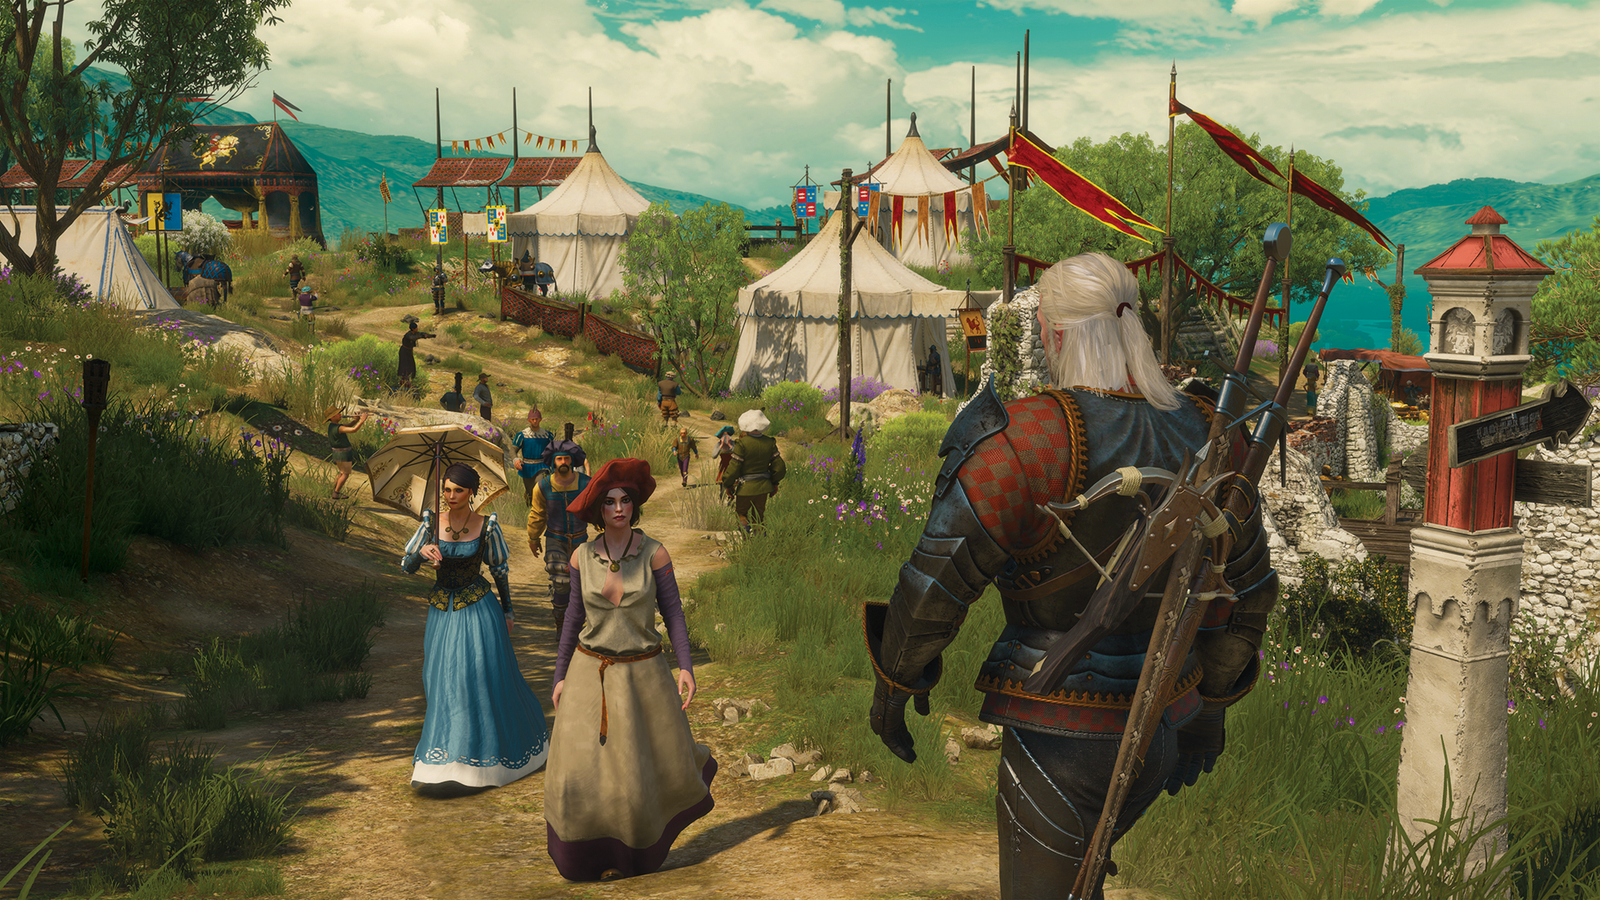 Geralt of Rivia walking among a village in The Witcher 3: Wild Hunt.